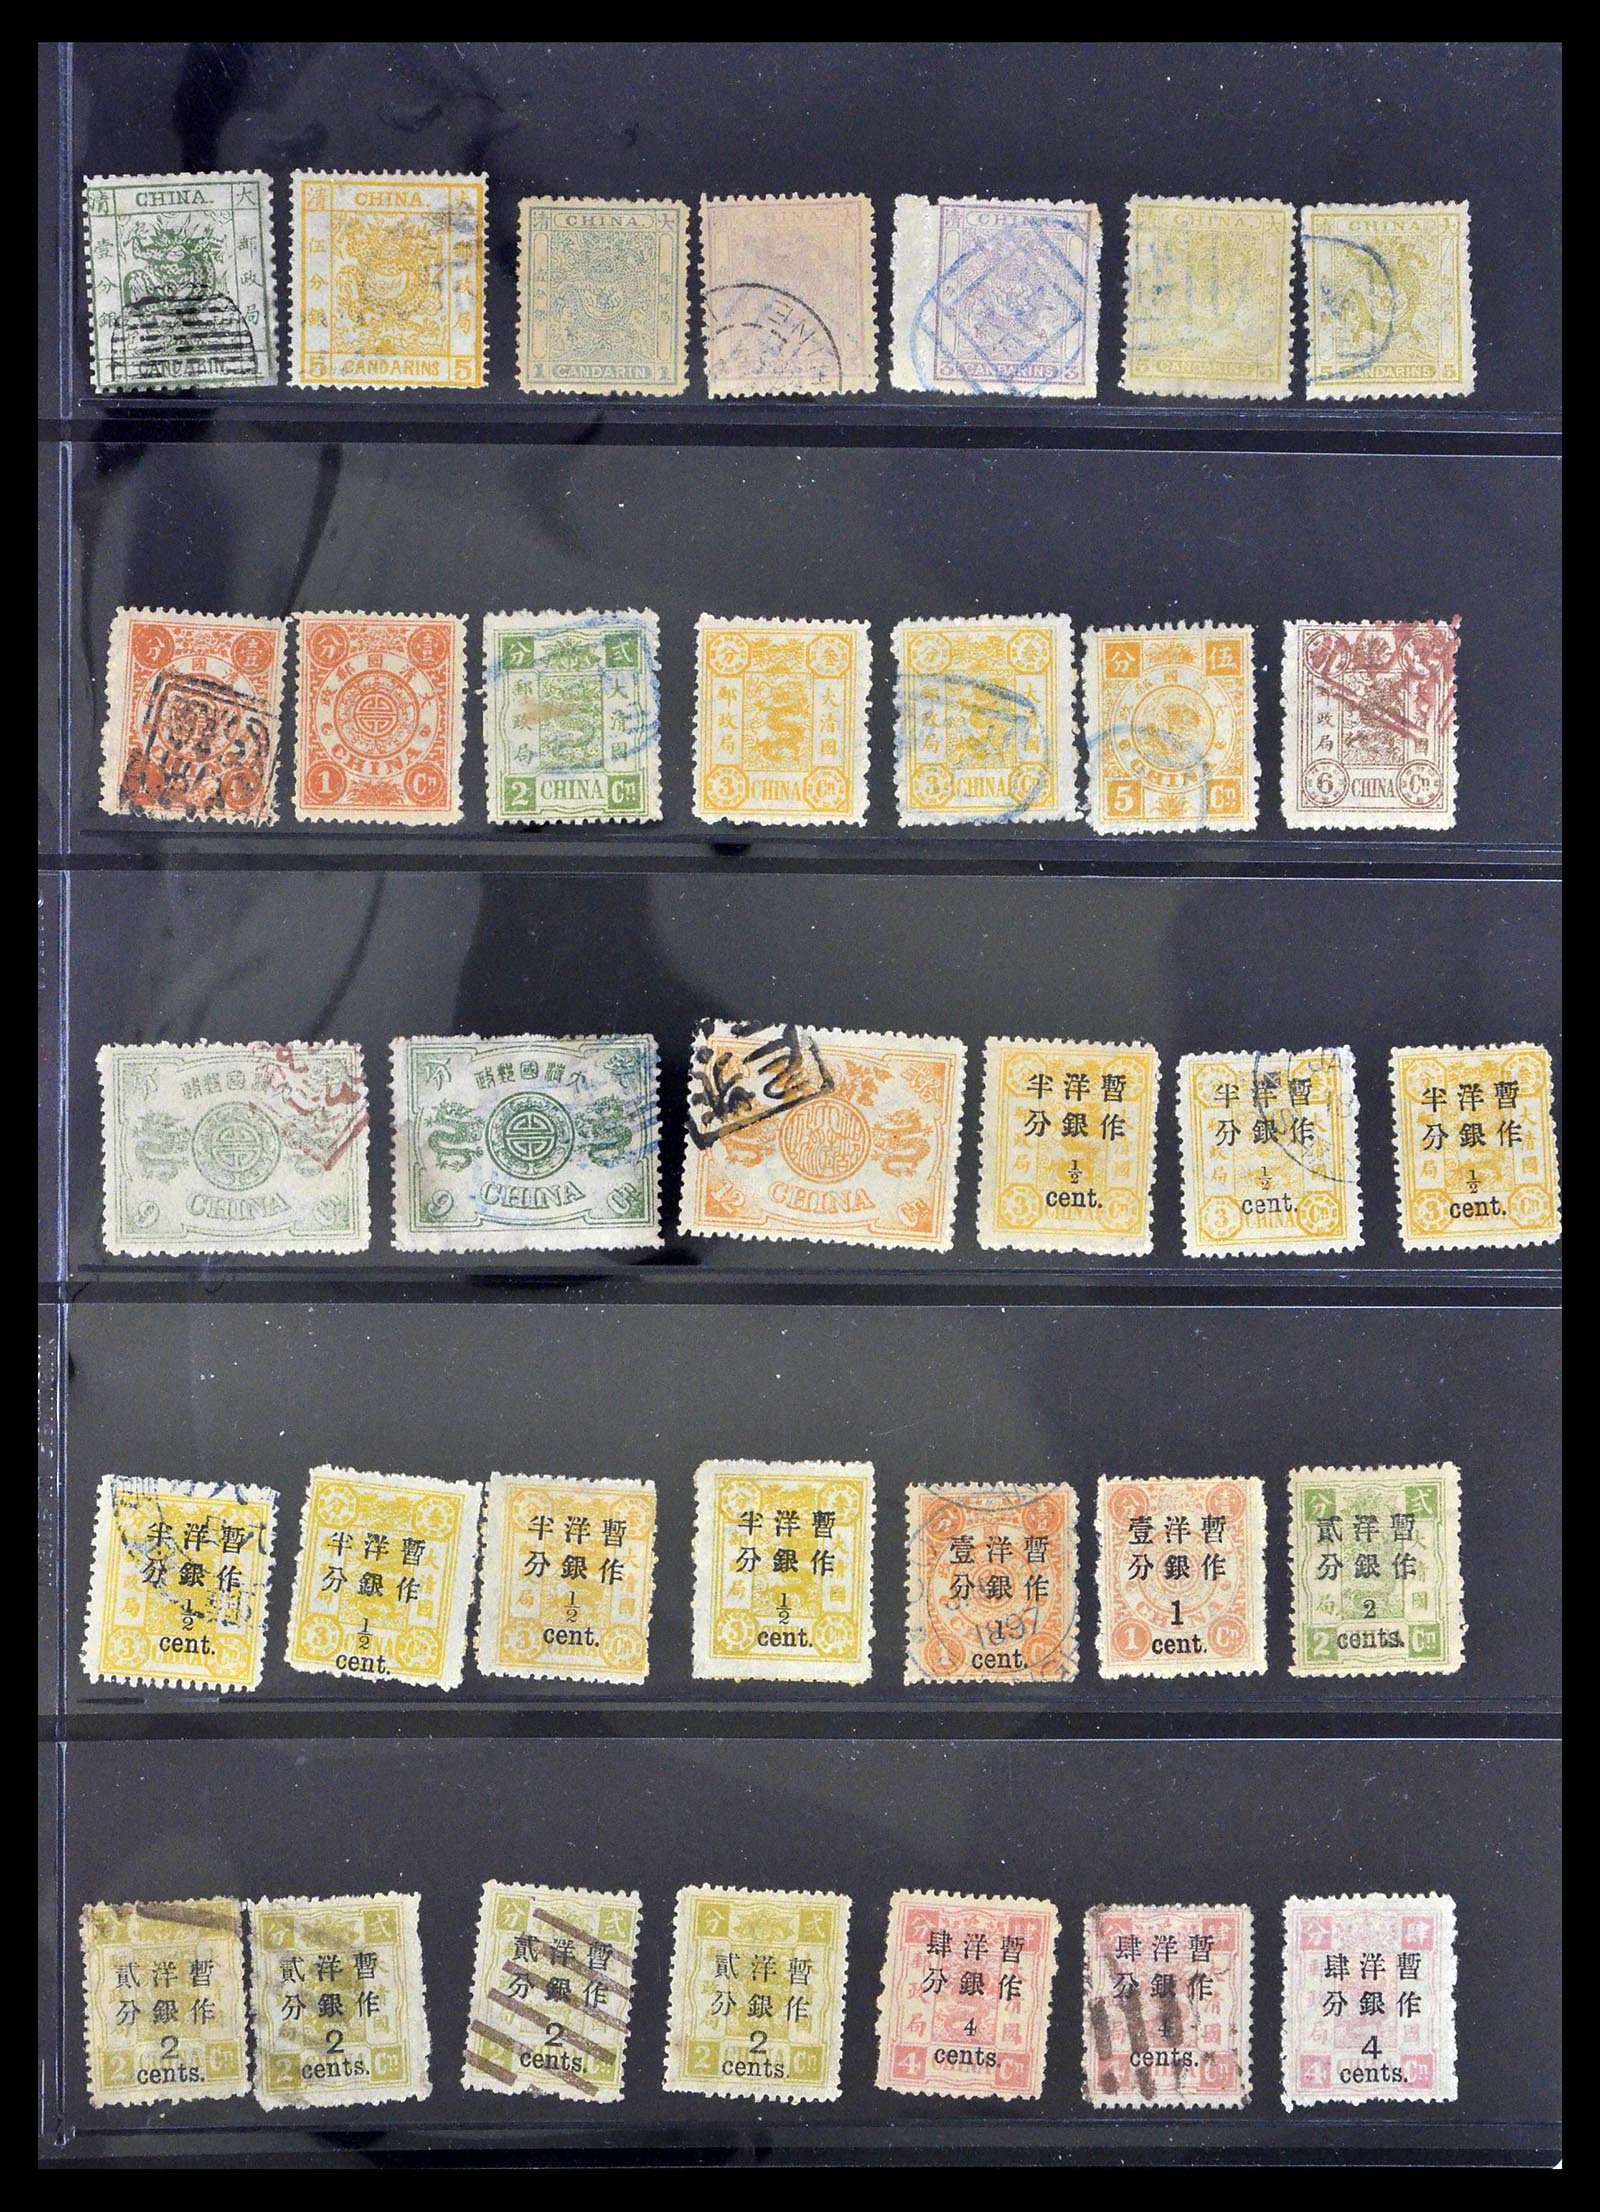 39301 0001 - Stamp collection 39301 China 1883-1897.